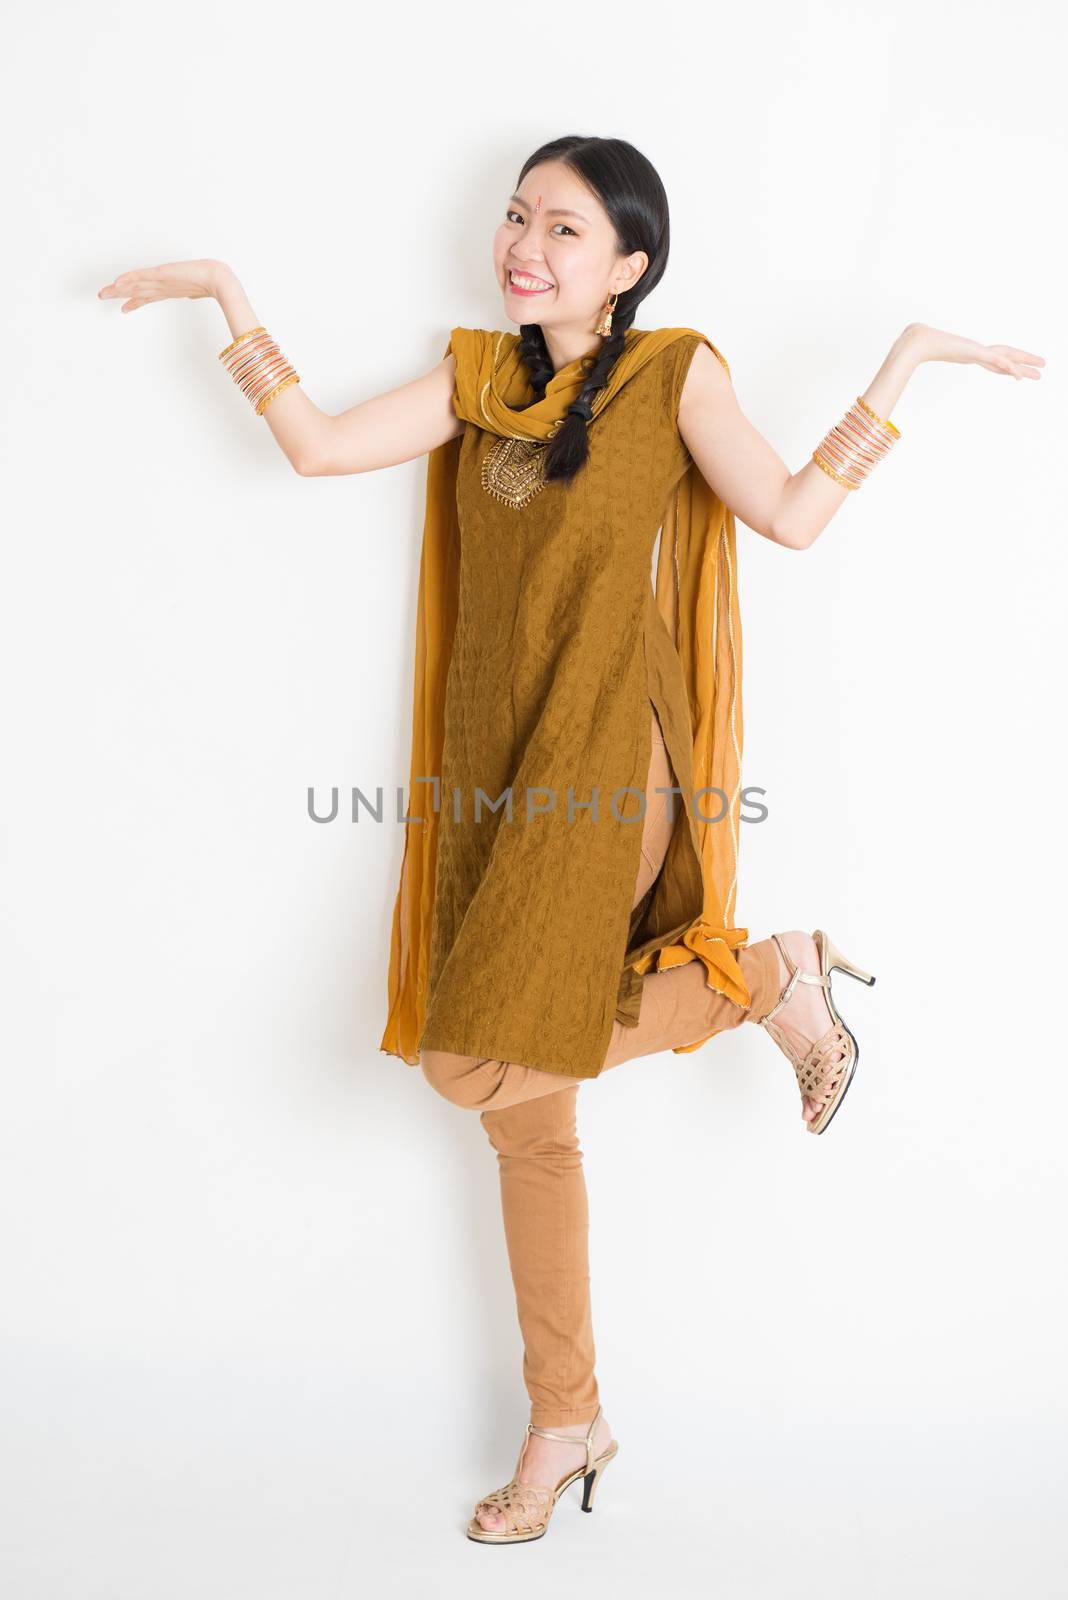 Portrait of excited mixed race Indian Chinese girl in traditional punjabi dress palms showing something, full length standing on plain white background.